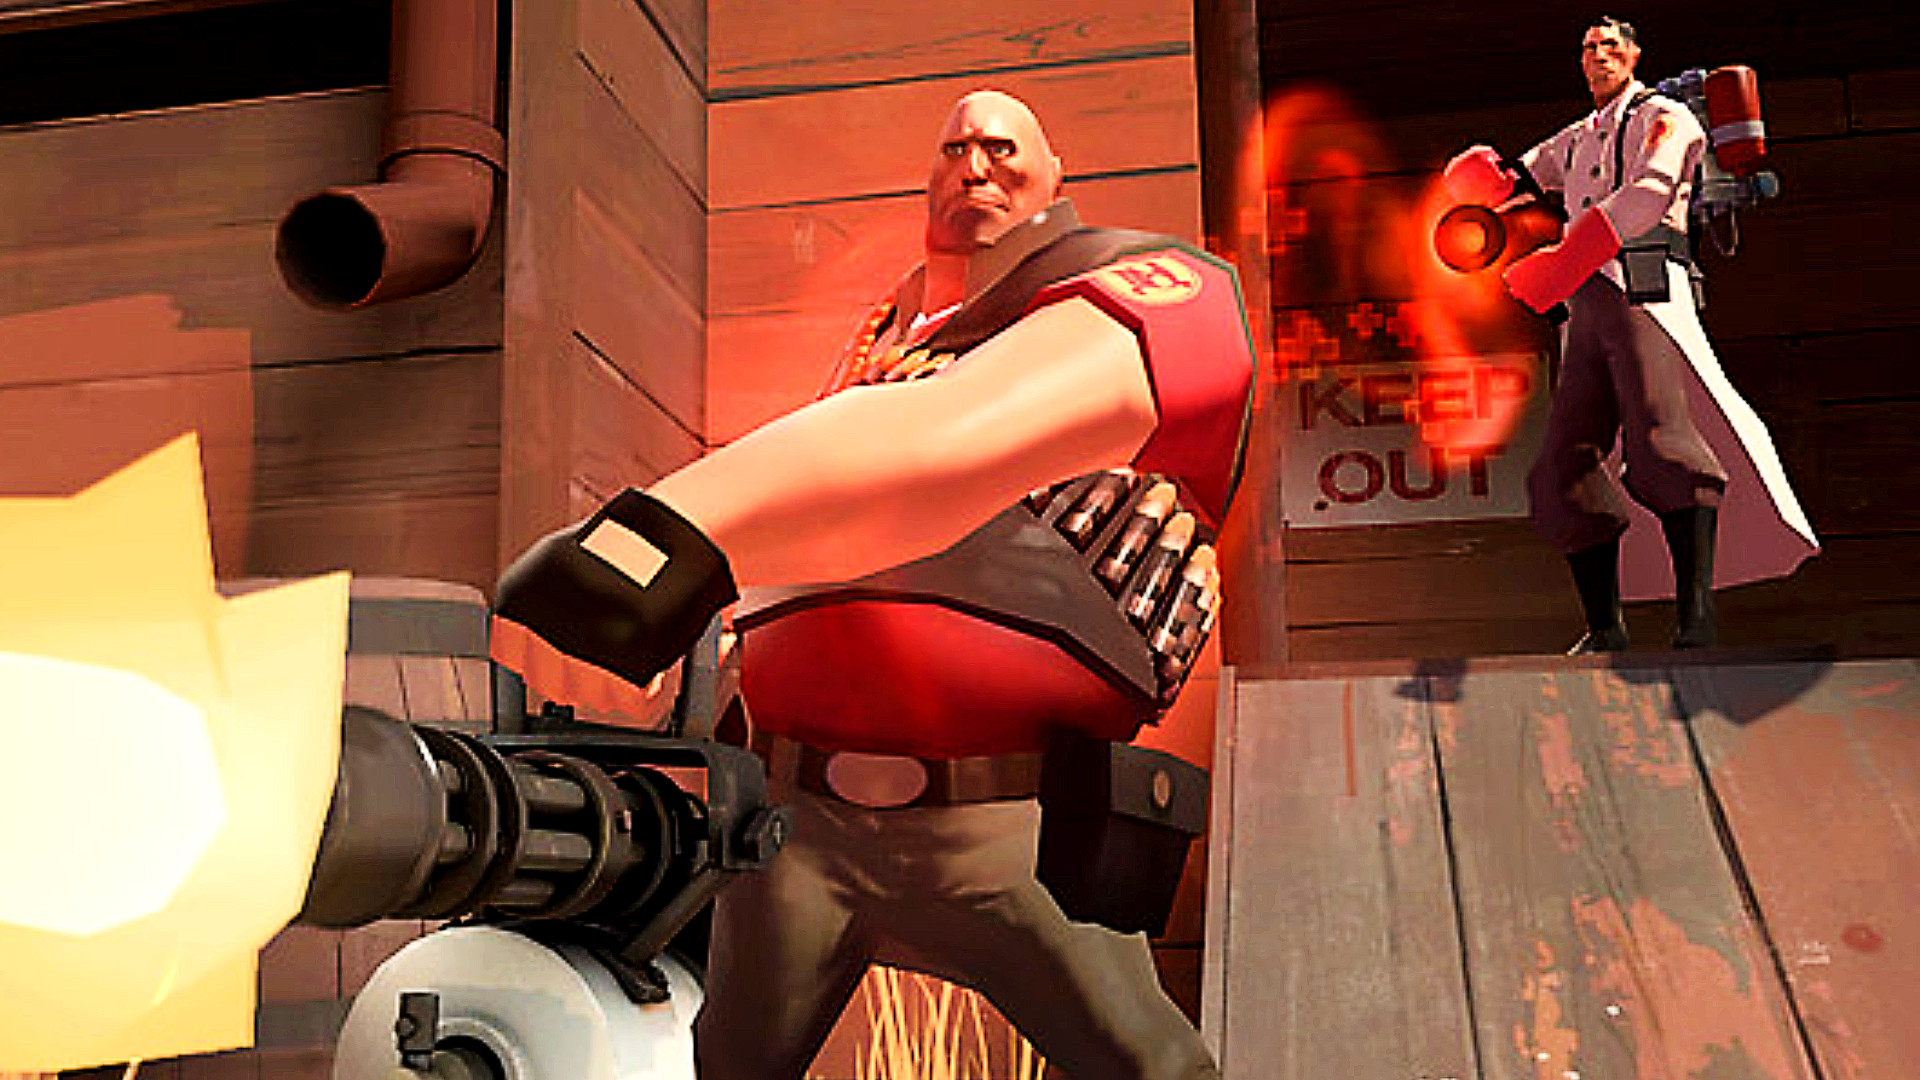 Valve responds to Team Fortress 2 fans' #SaveTF2 campaign | PCGamesN